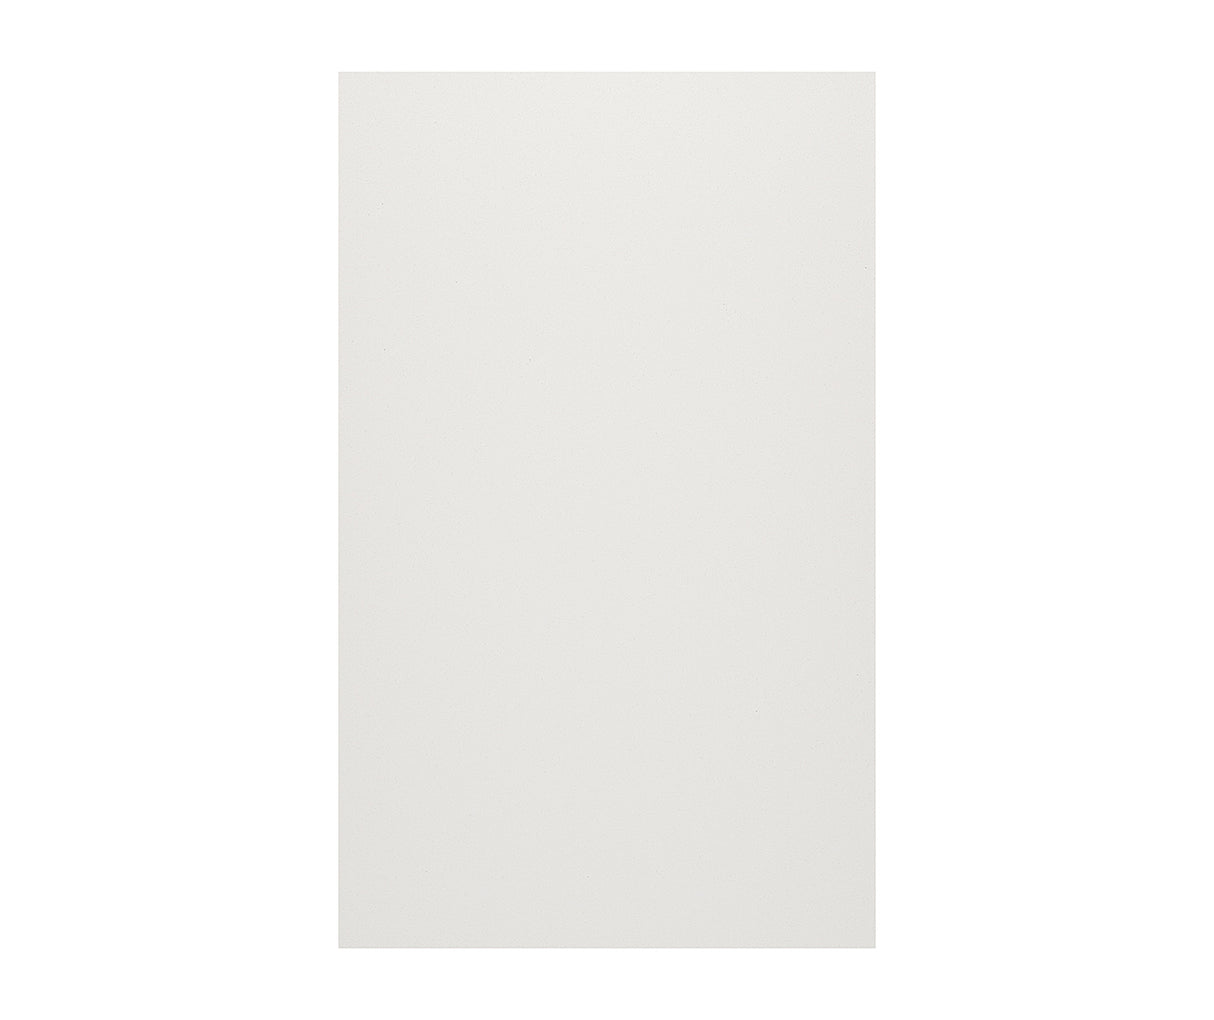 Swanstone SS-3696-2 36 x 96 Swanstone Smooth Glue up Bathtub and Shower Single Wall Panel in Birch SS0369602.226